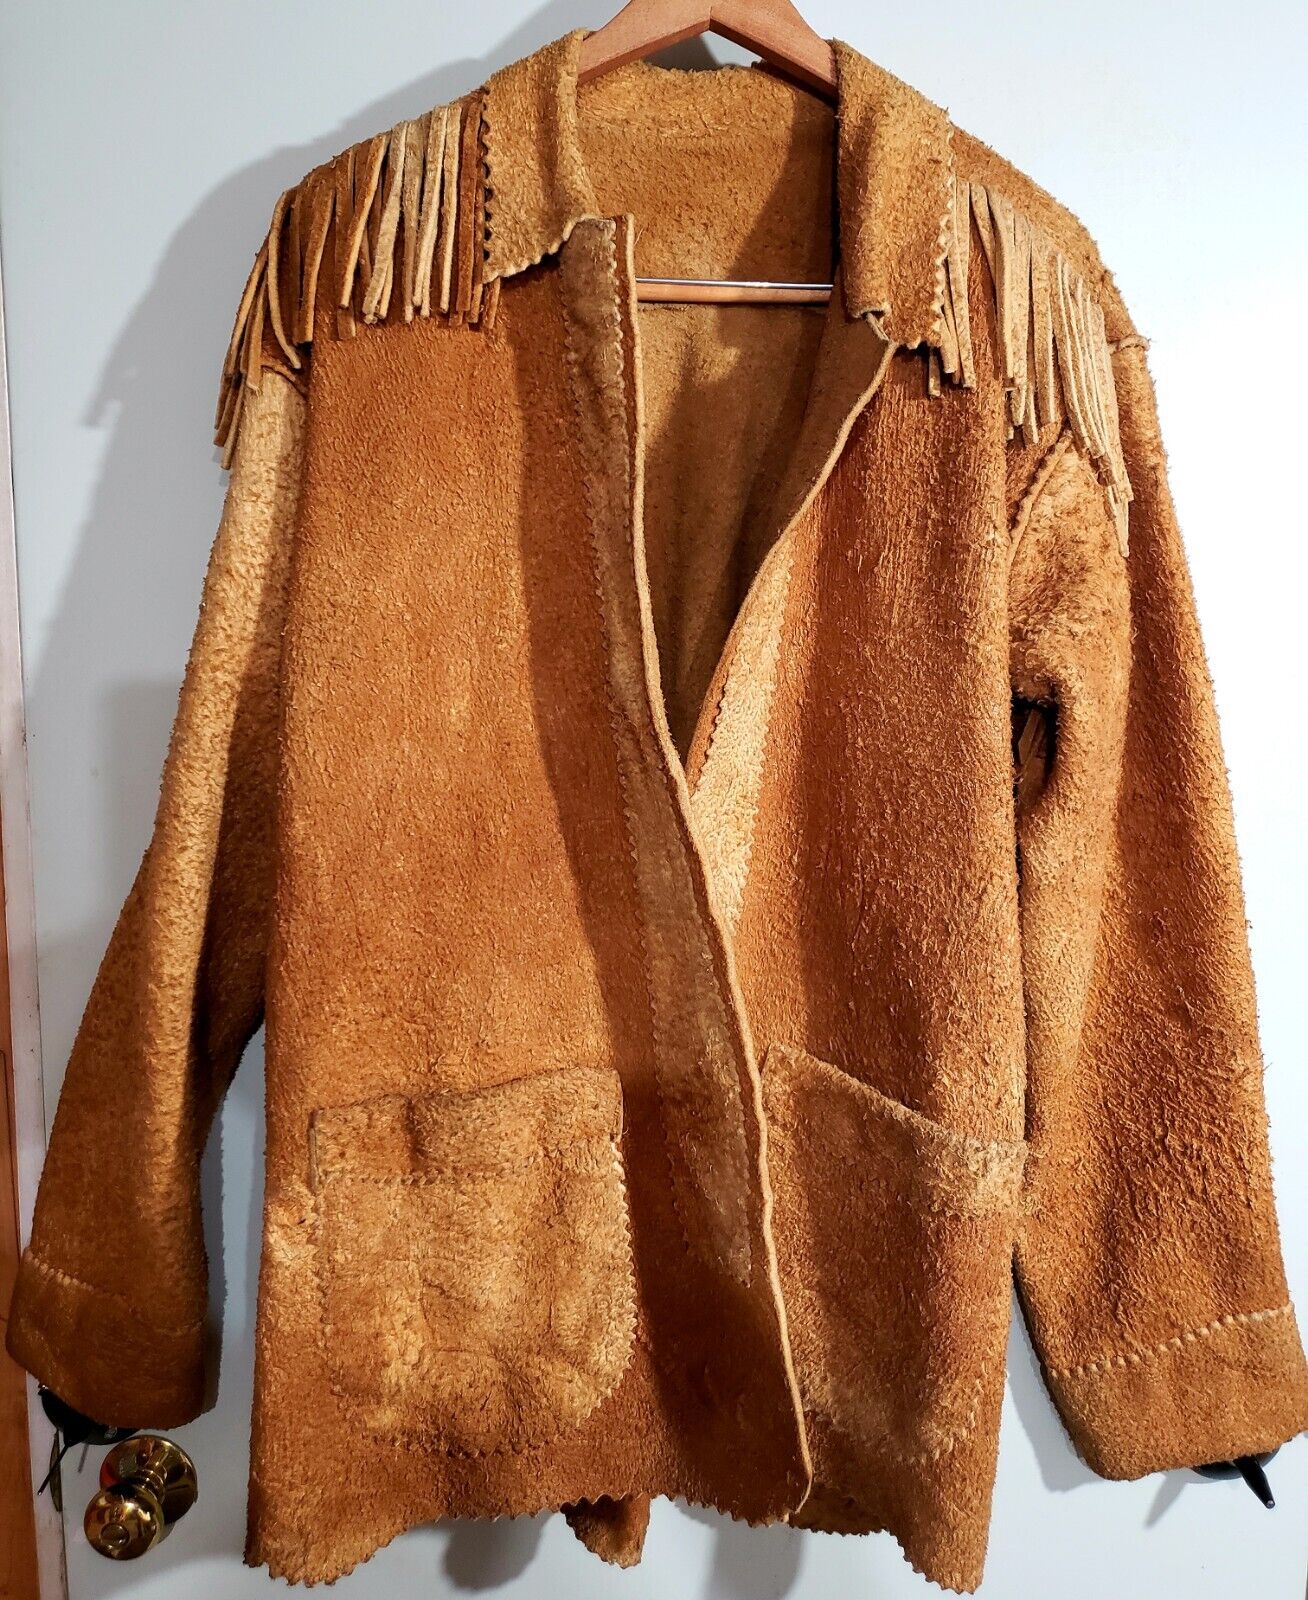 Antique Native American Hand Sewn Heavy Leather Jacket. Very Old Buckskin Jacket